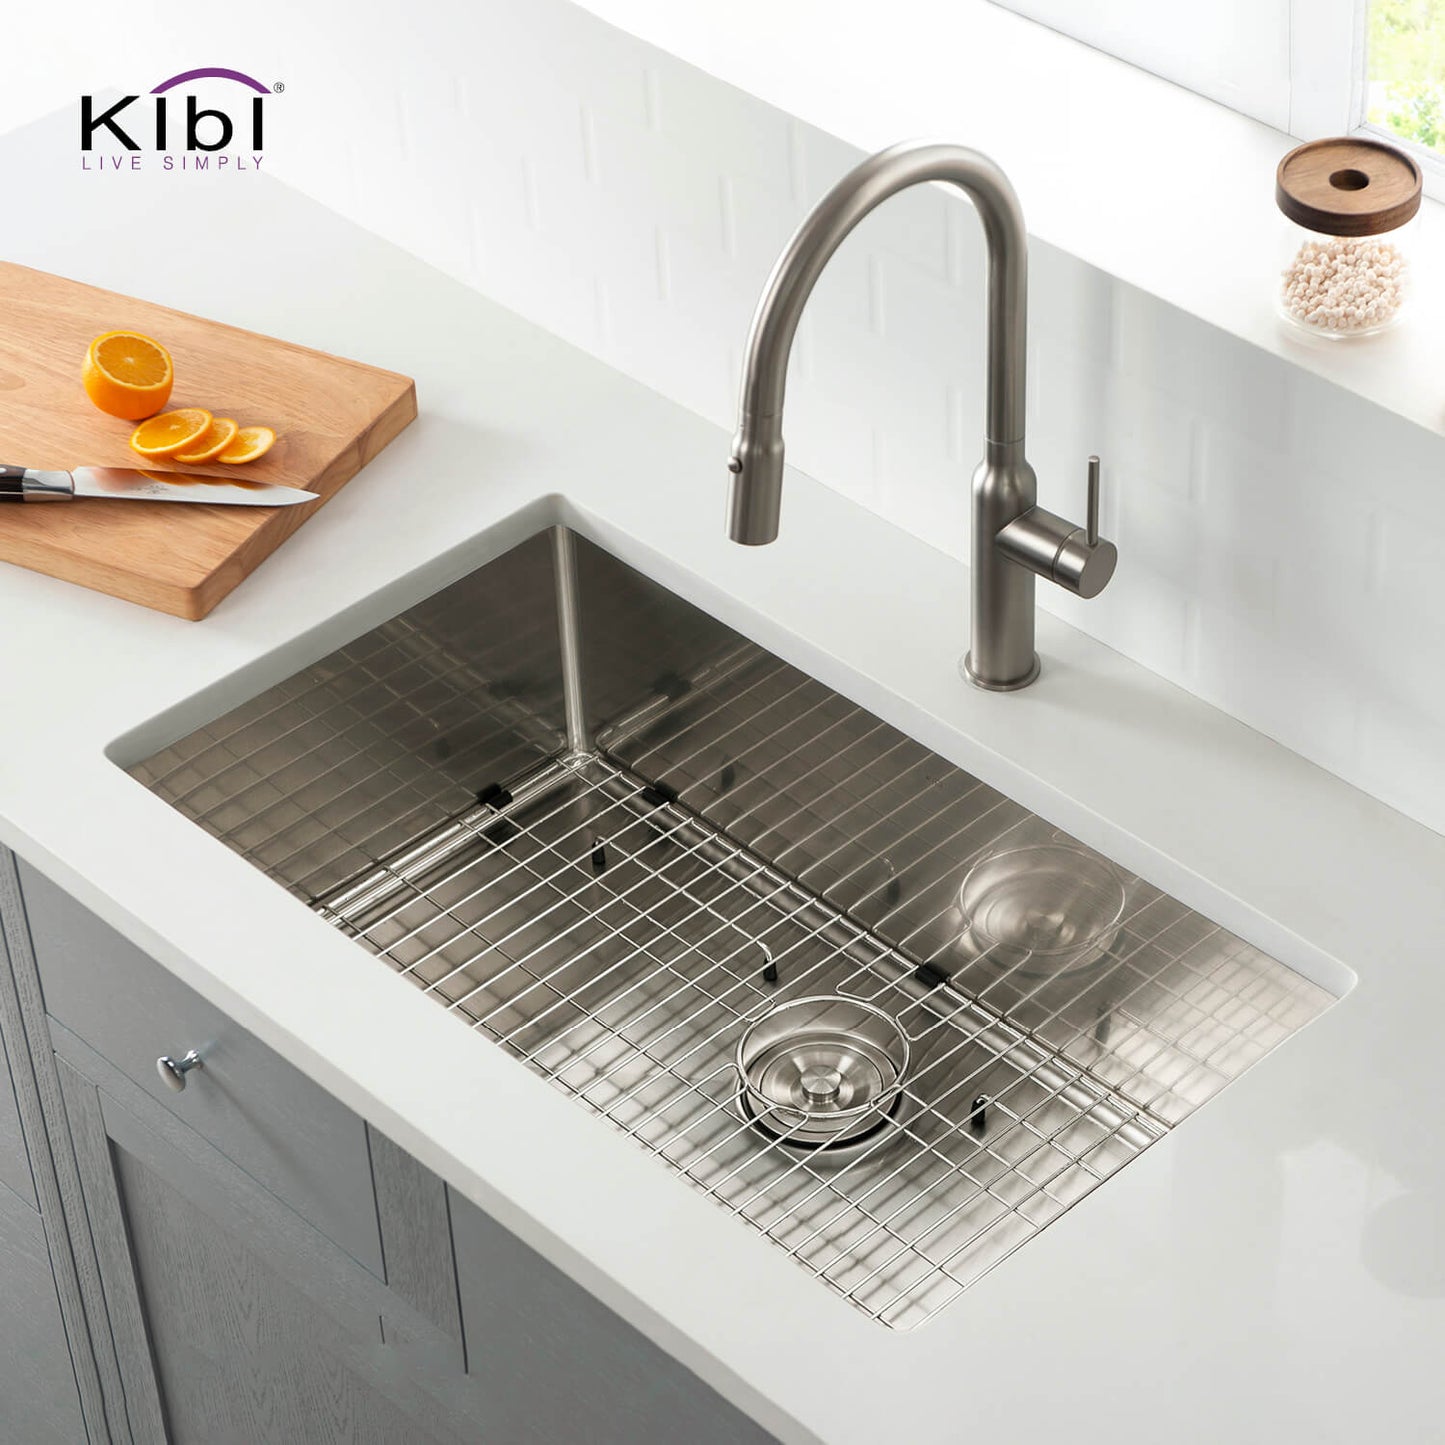 Kibi 32 3/4" x 19" x 10" Handcrafted Undermount Single Bowl Stainless Steel Kitchen Sink With Satin Finish